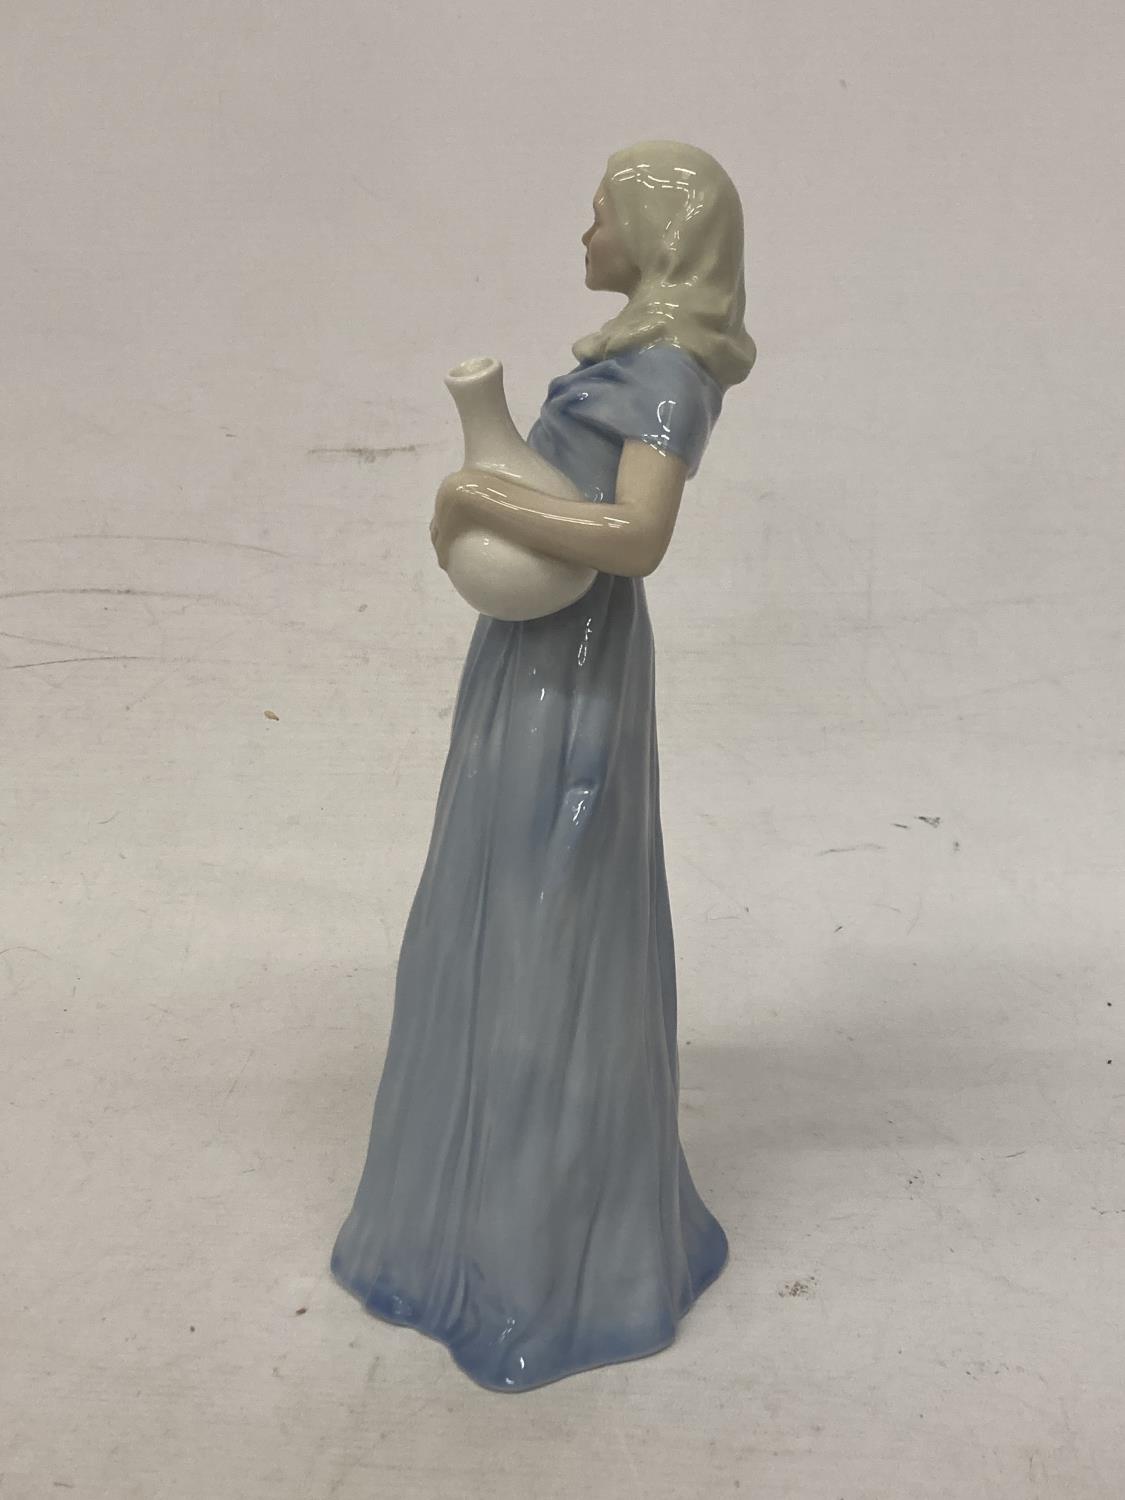 A ROYAL DOULTON FIGURE REFLECTIONS "WATER MAIDEN" HN 3155 - Image 4 of 5